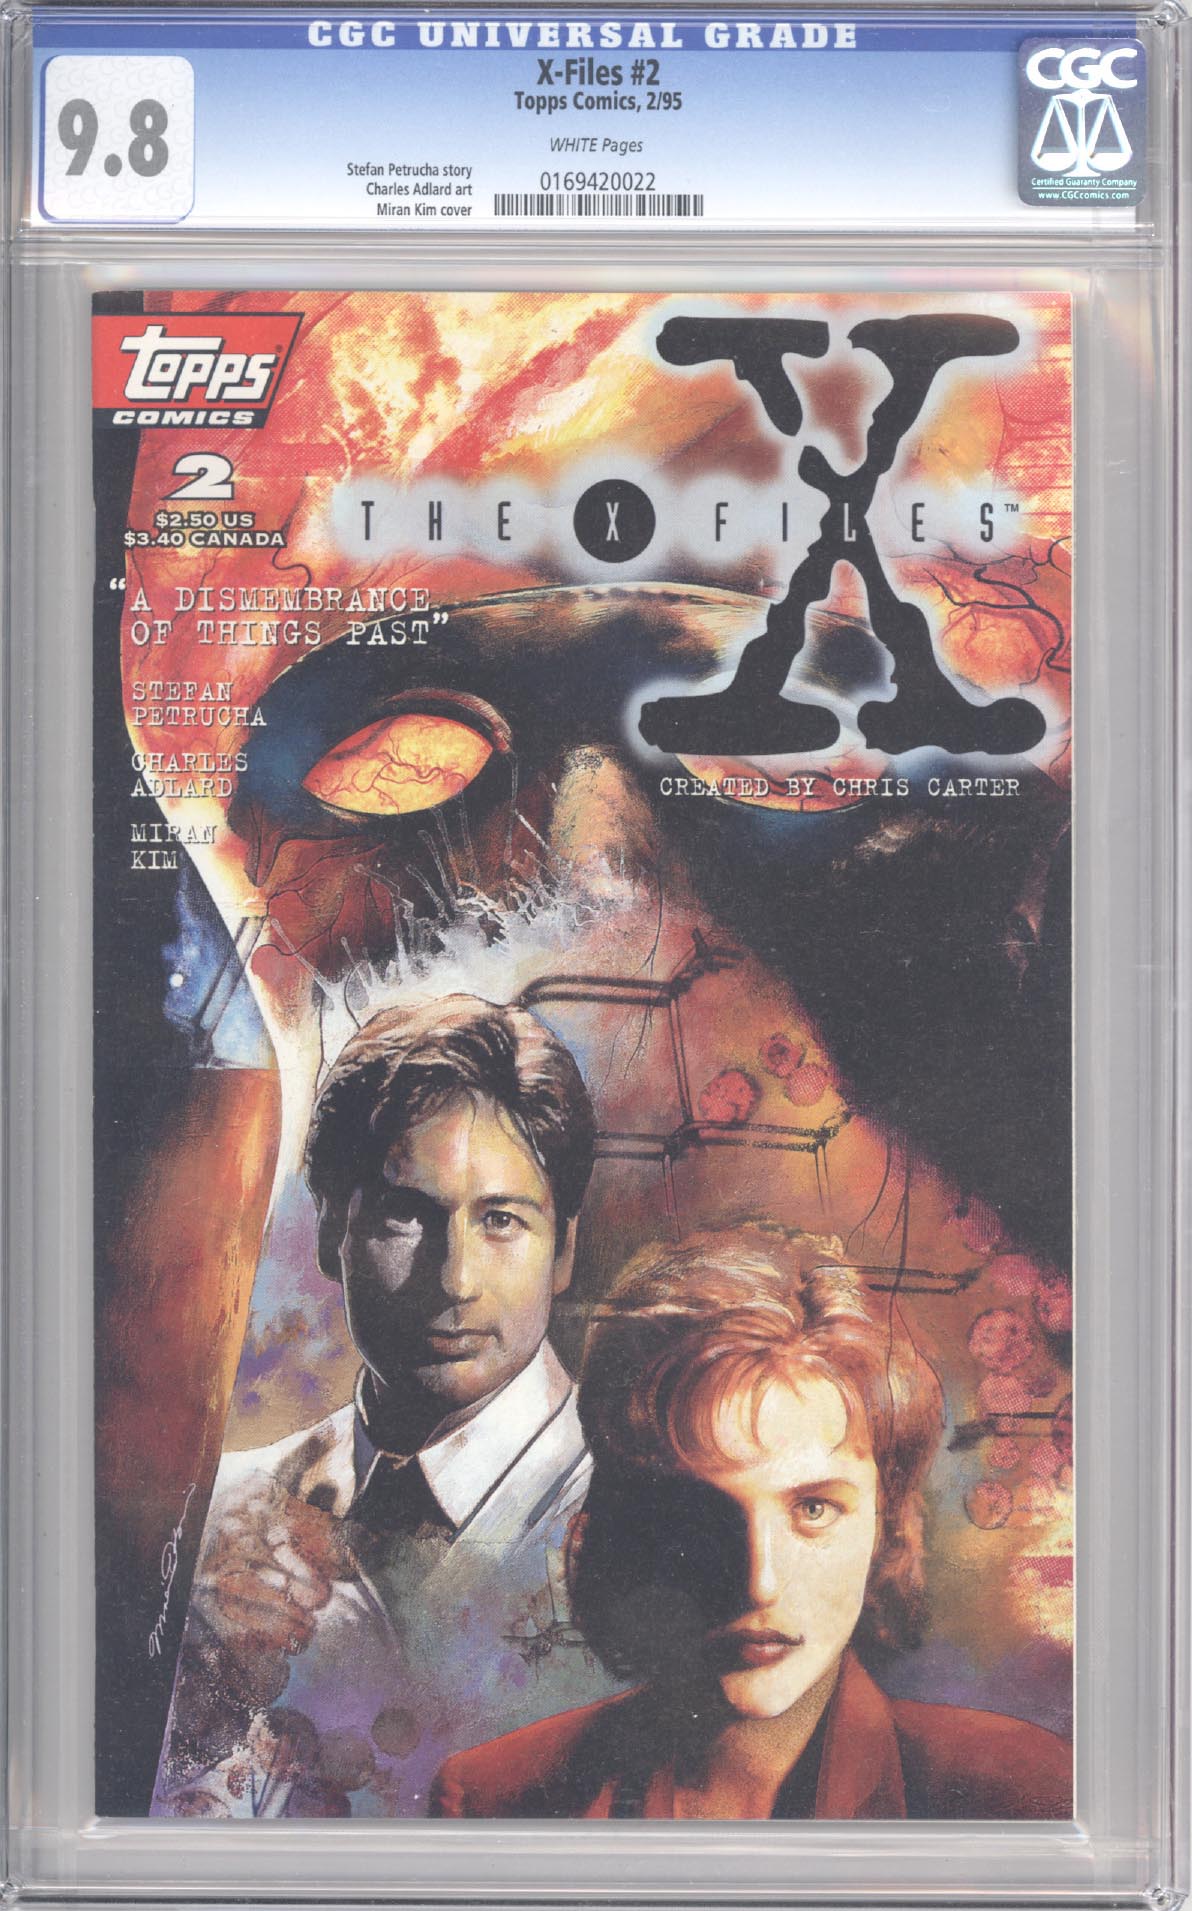 X-Files #2 front